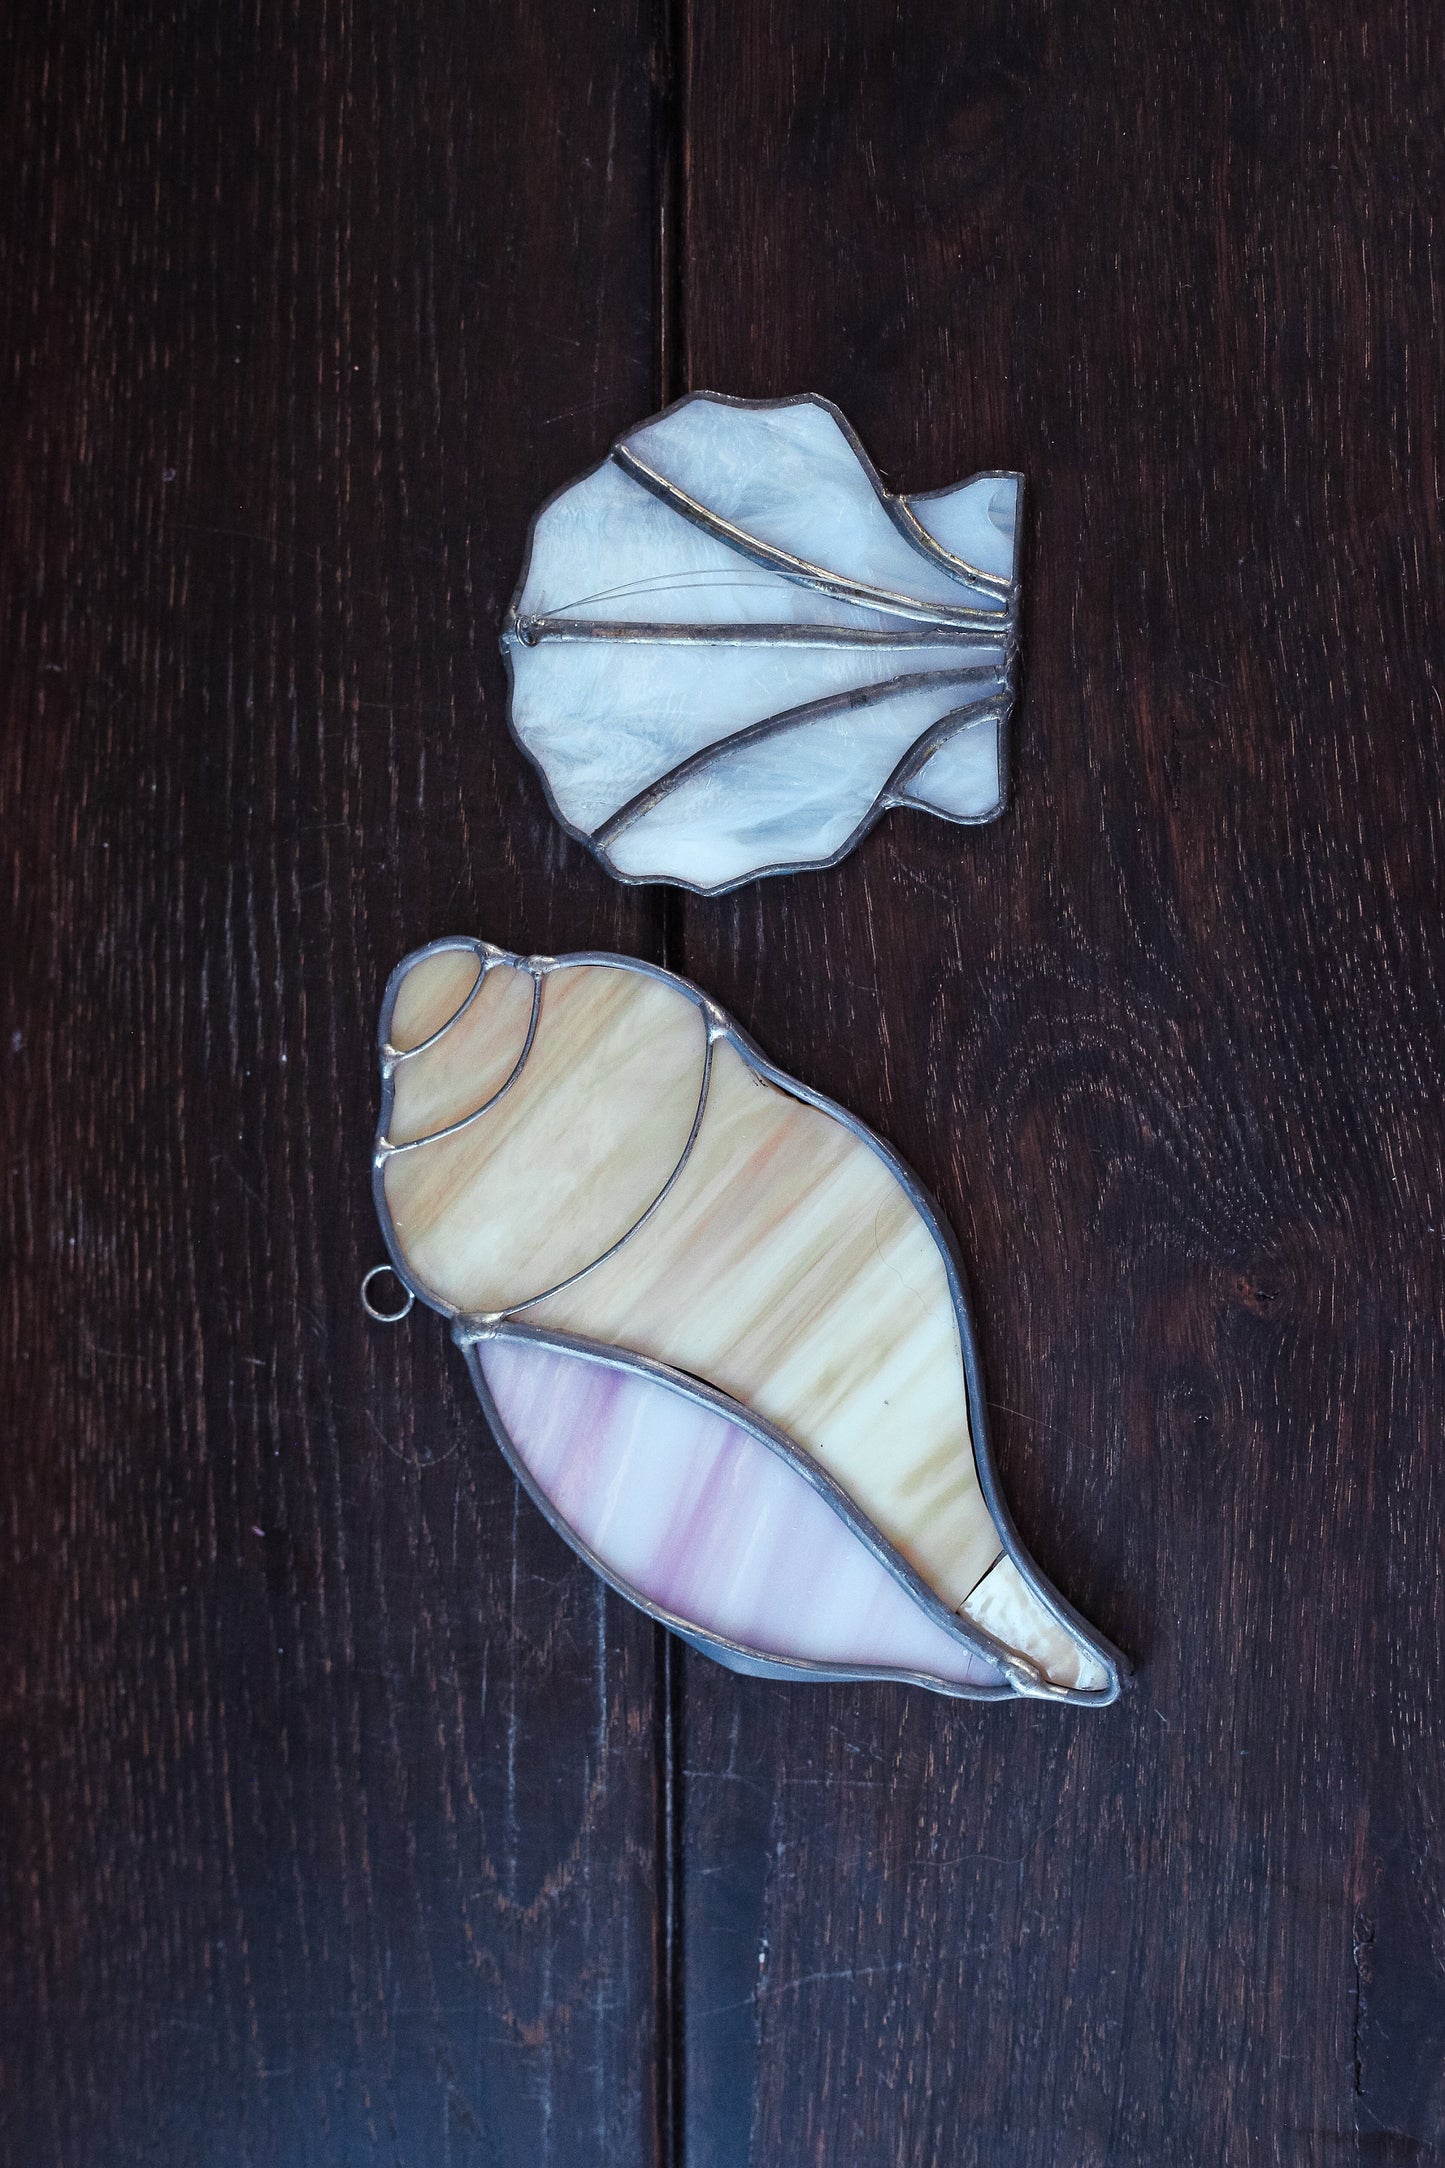 Pair of Stained Glass Shell Shaped Suncatchers - Vintage Stained Glass Ornaments